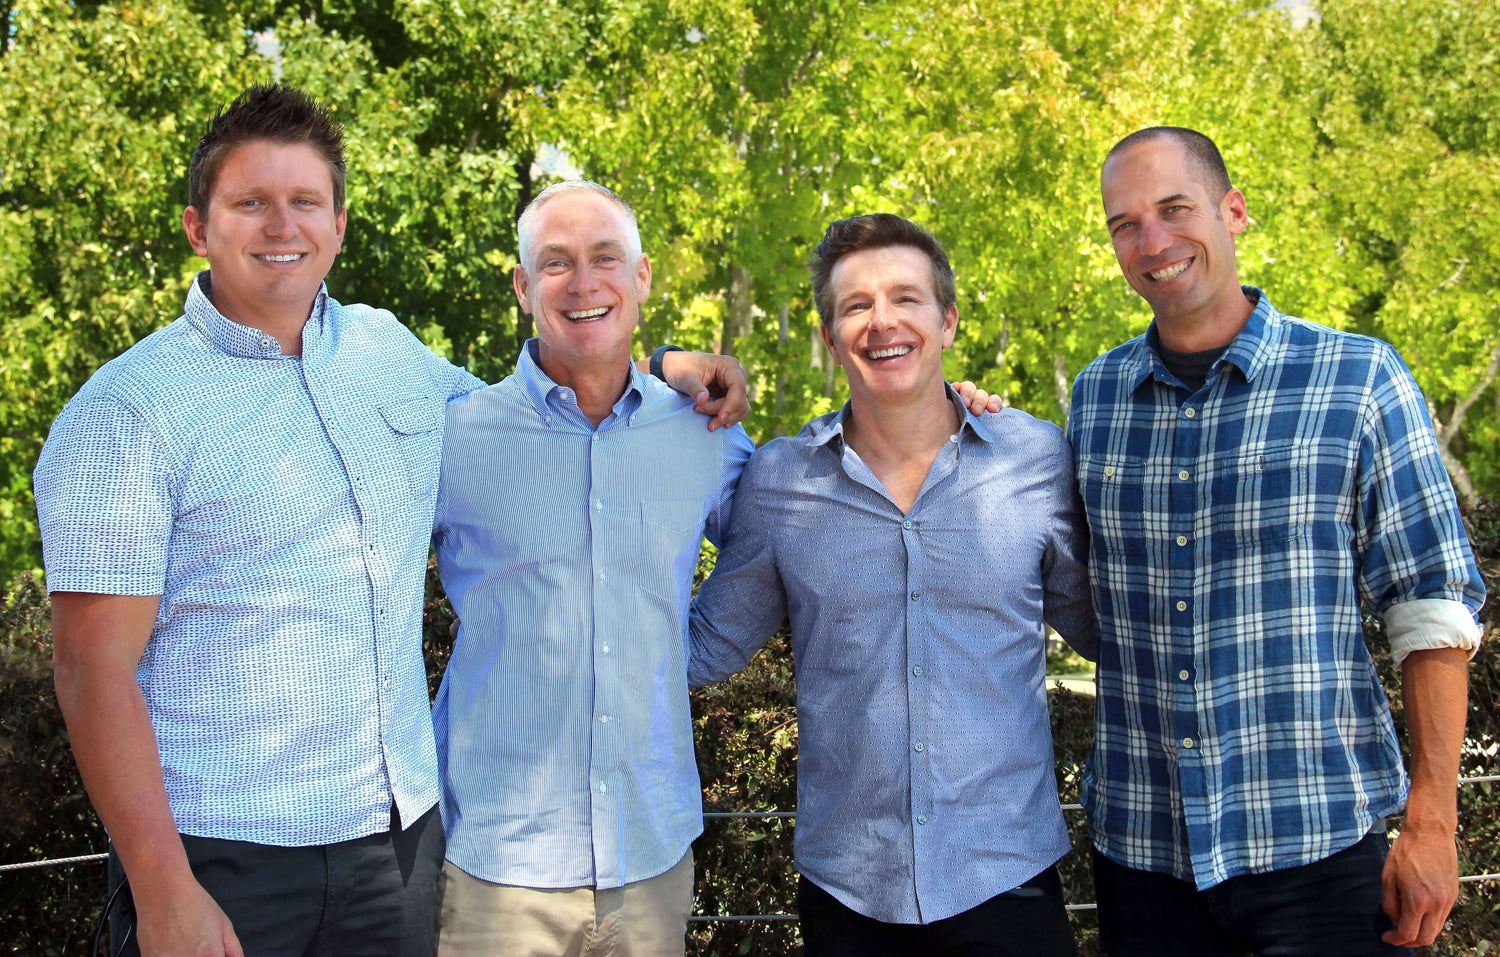 Lulls four founders smiling in a bright natural outdoor setting.